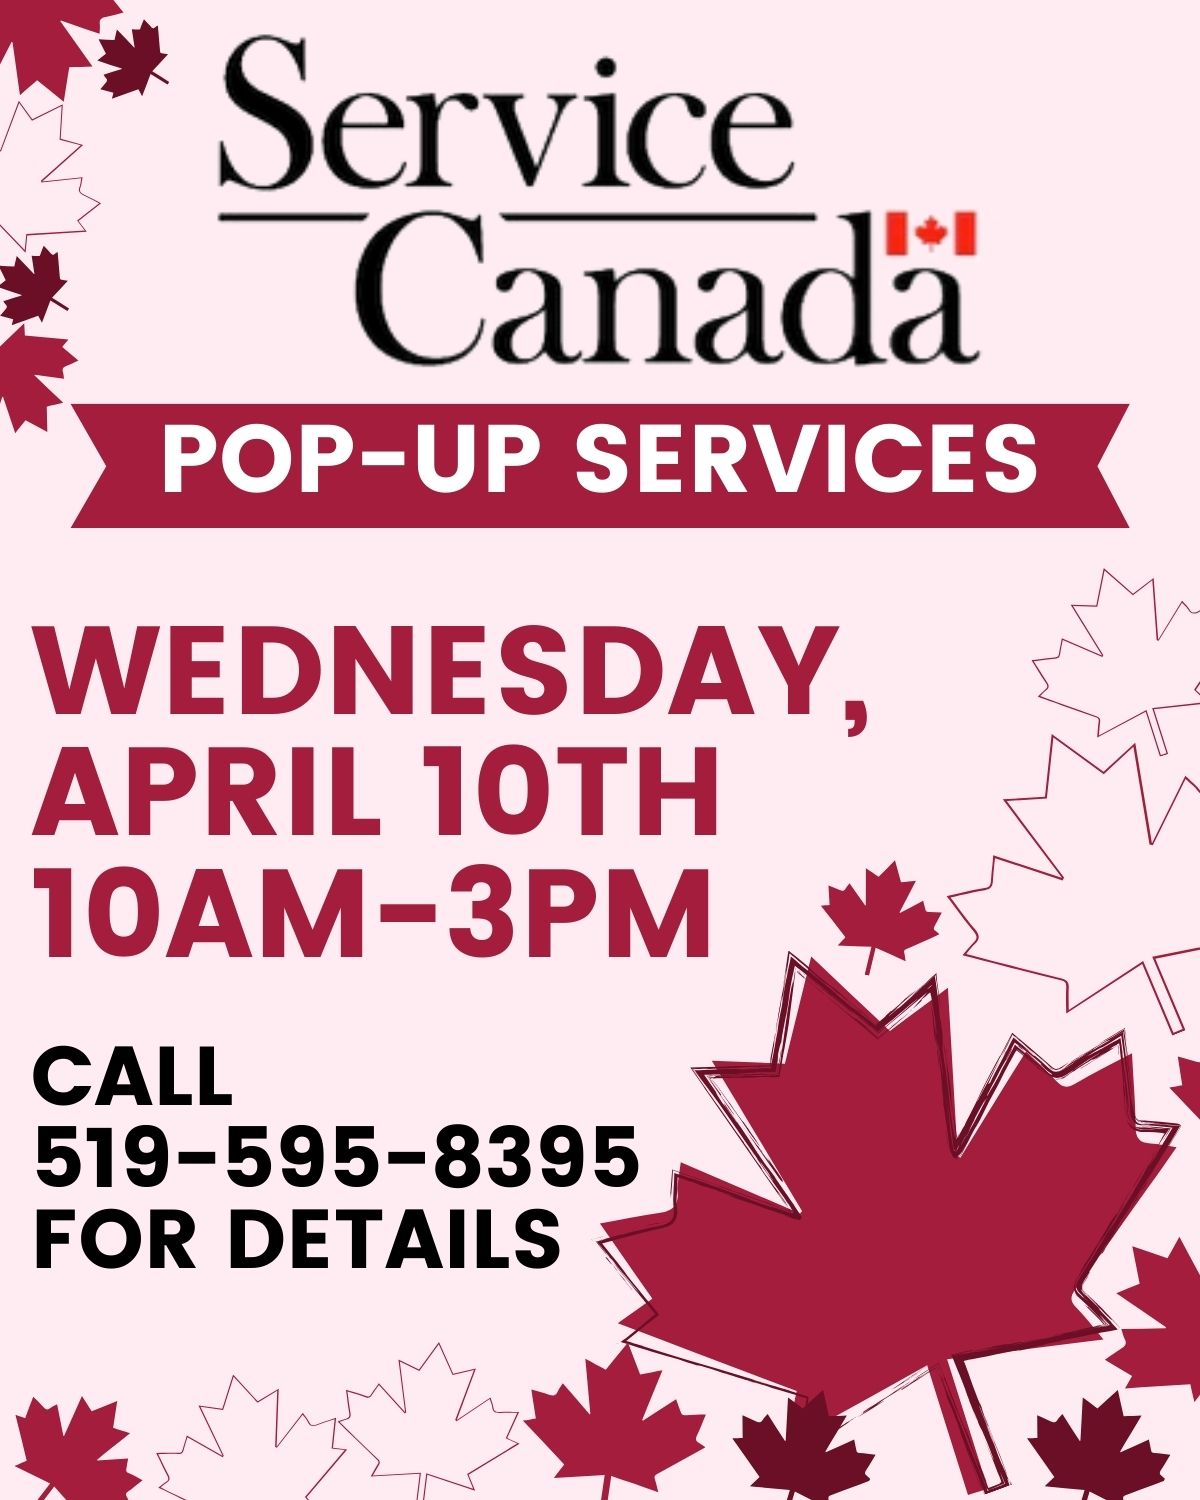 Service Canada Pop Up Services - Wednesday April 10th 10am-3pm